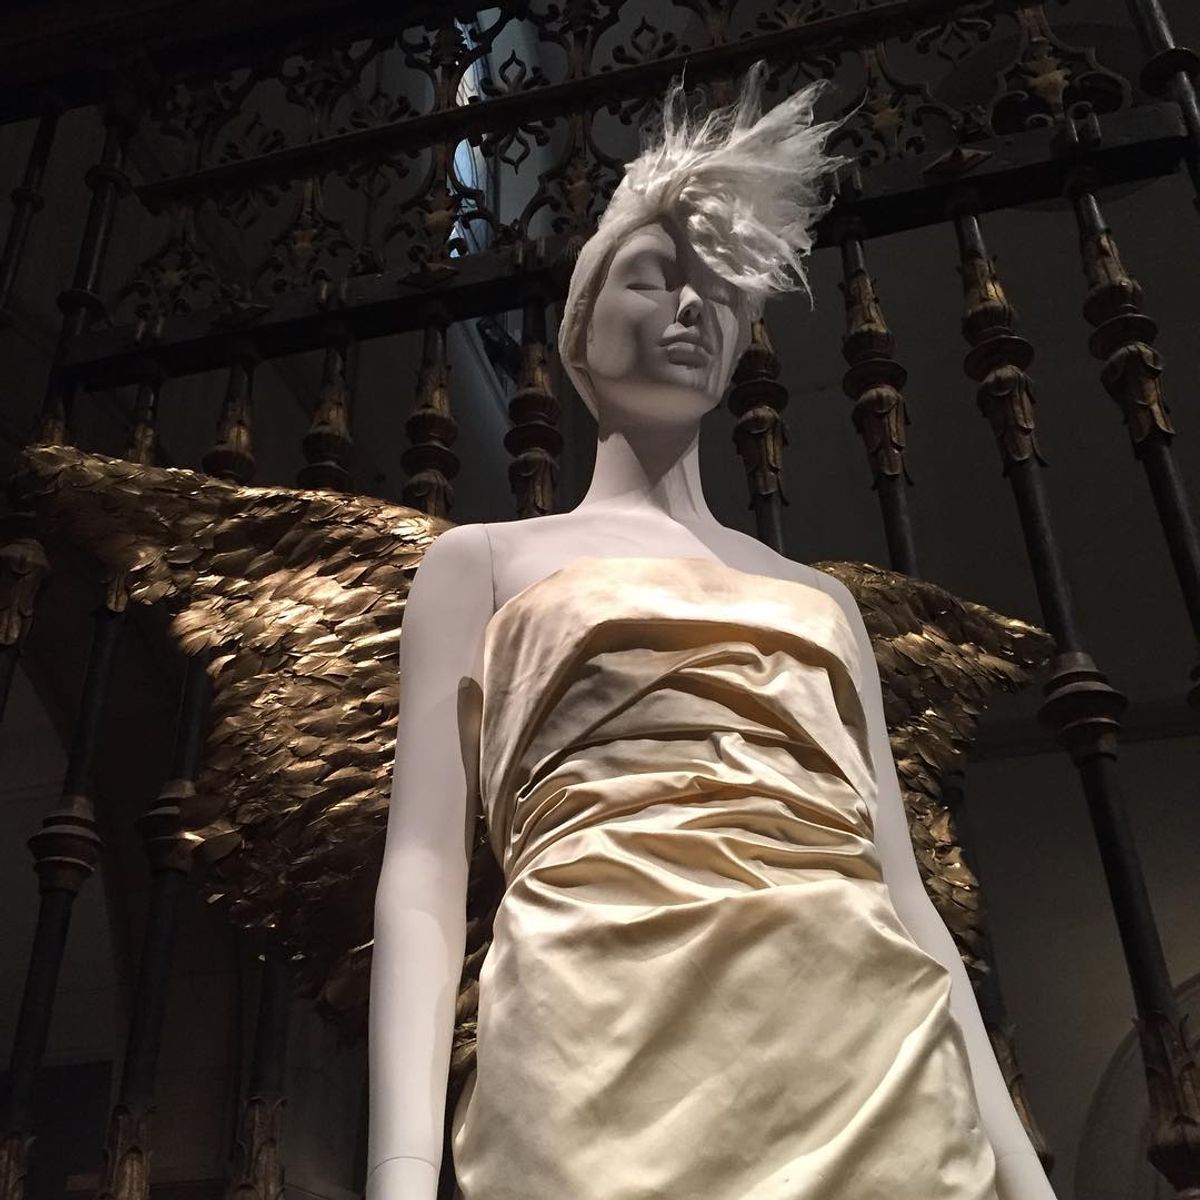 An installation view from Heavenly Bodies: Fashion and the Catholic Imagination at the Metropolitan Museum of Art The Art Newspaper